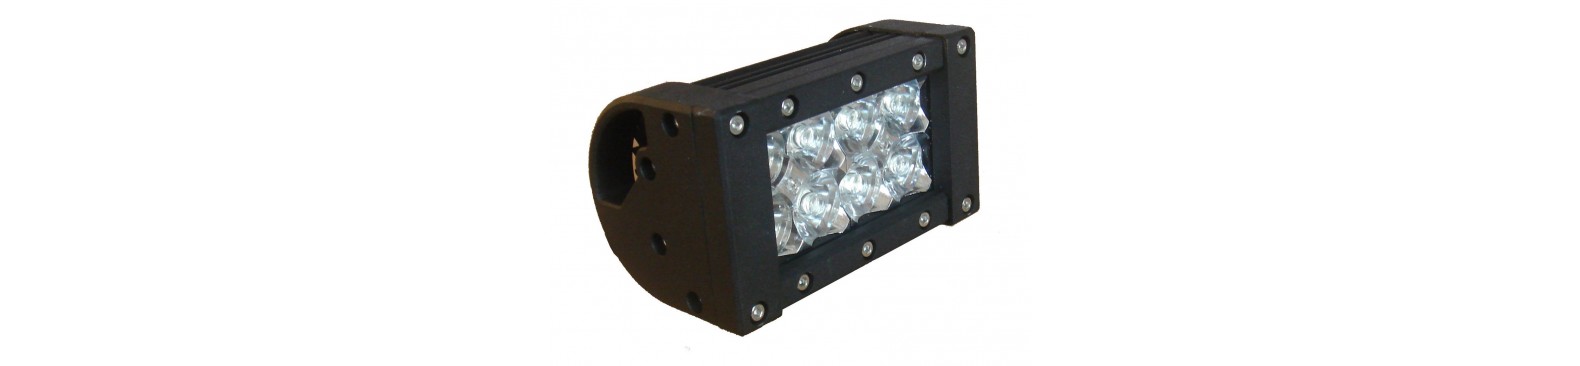 straight and radius LED Light bars for your UTV, truck, or off road vehicle